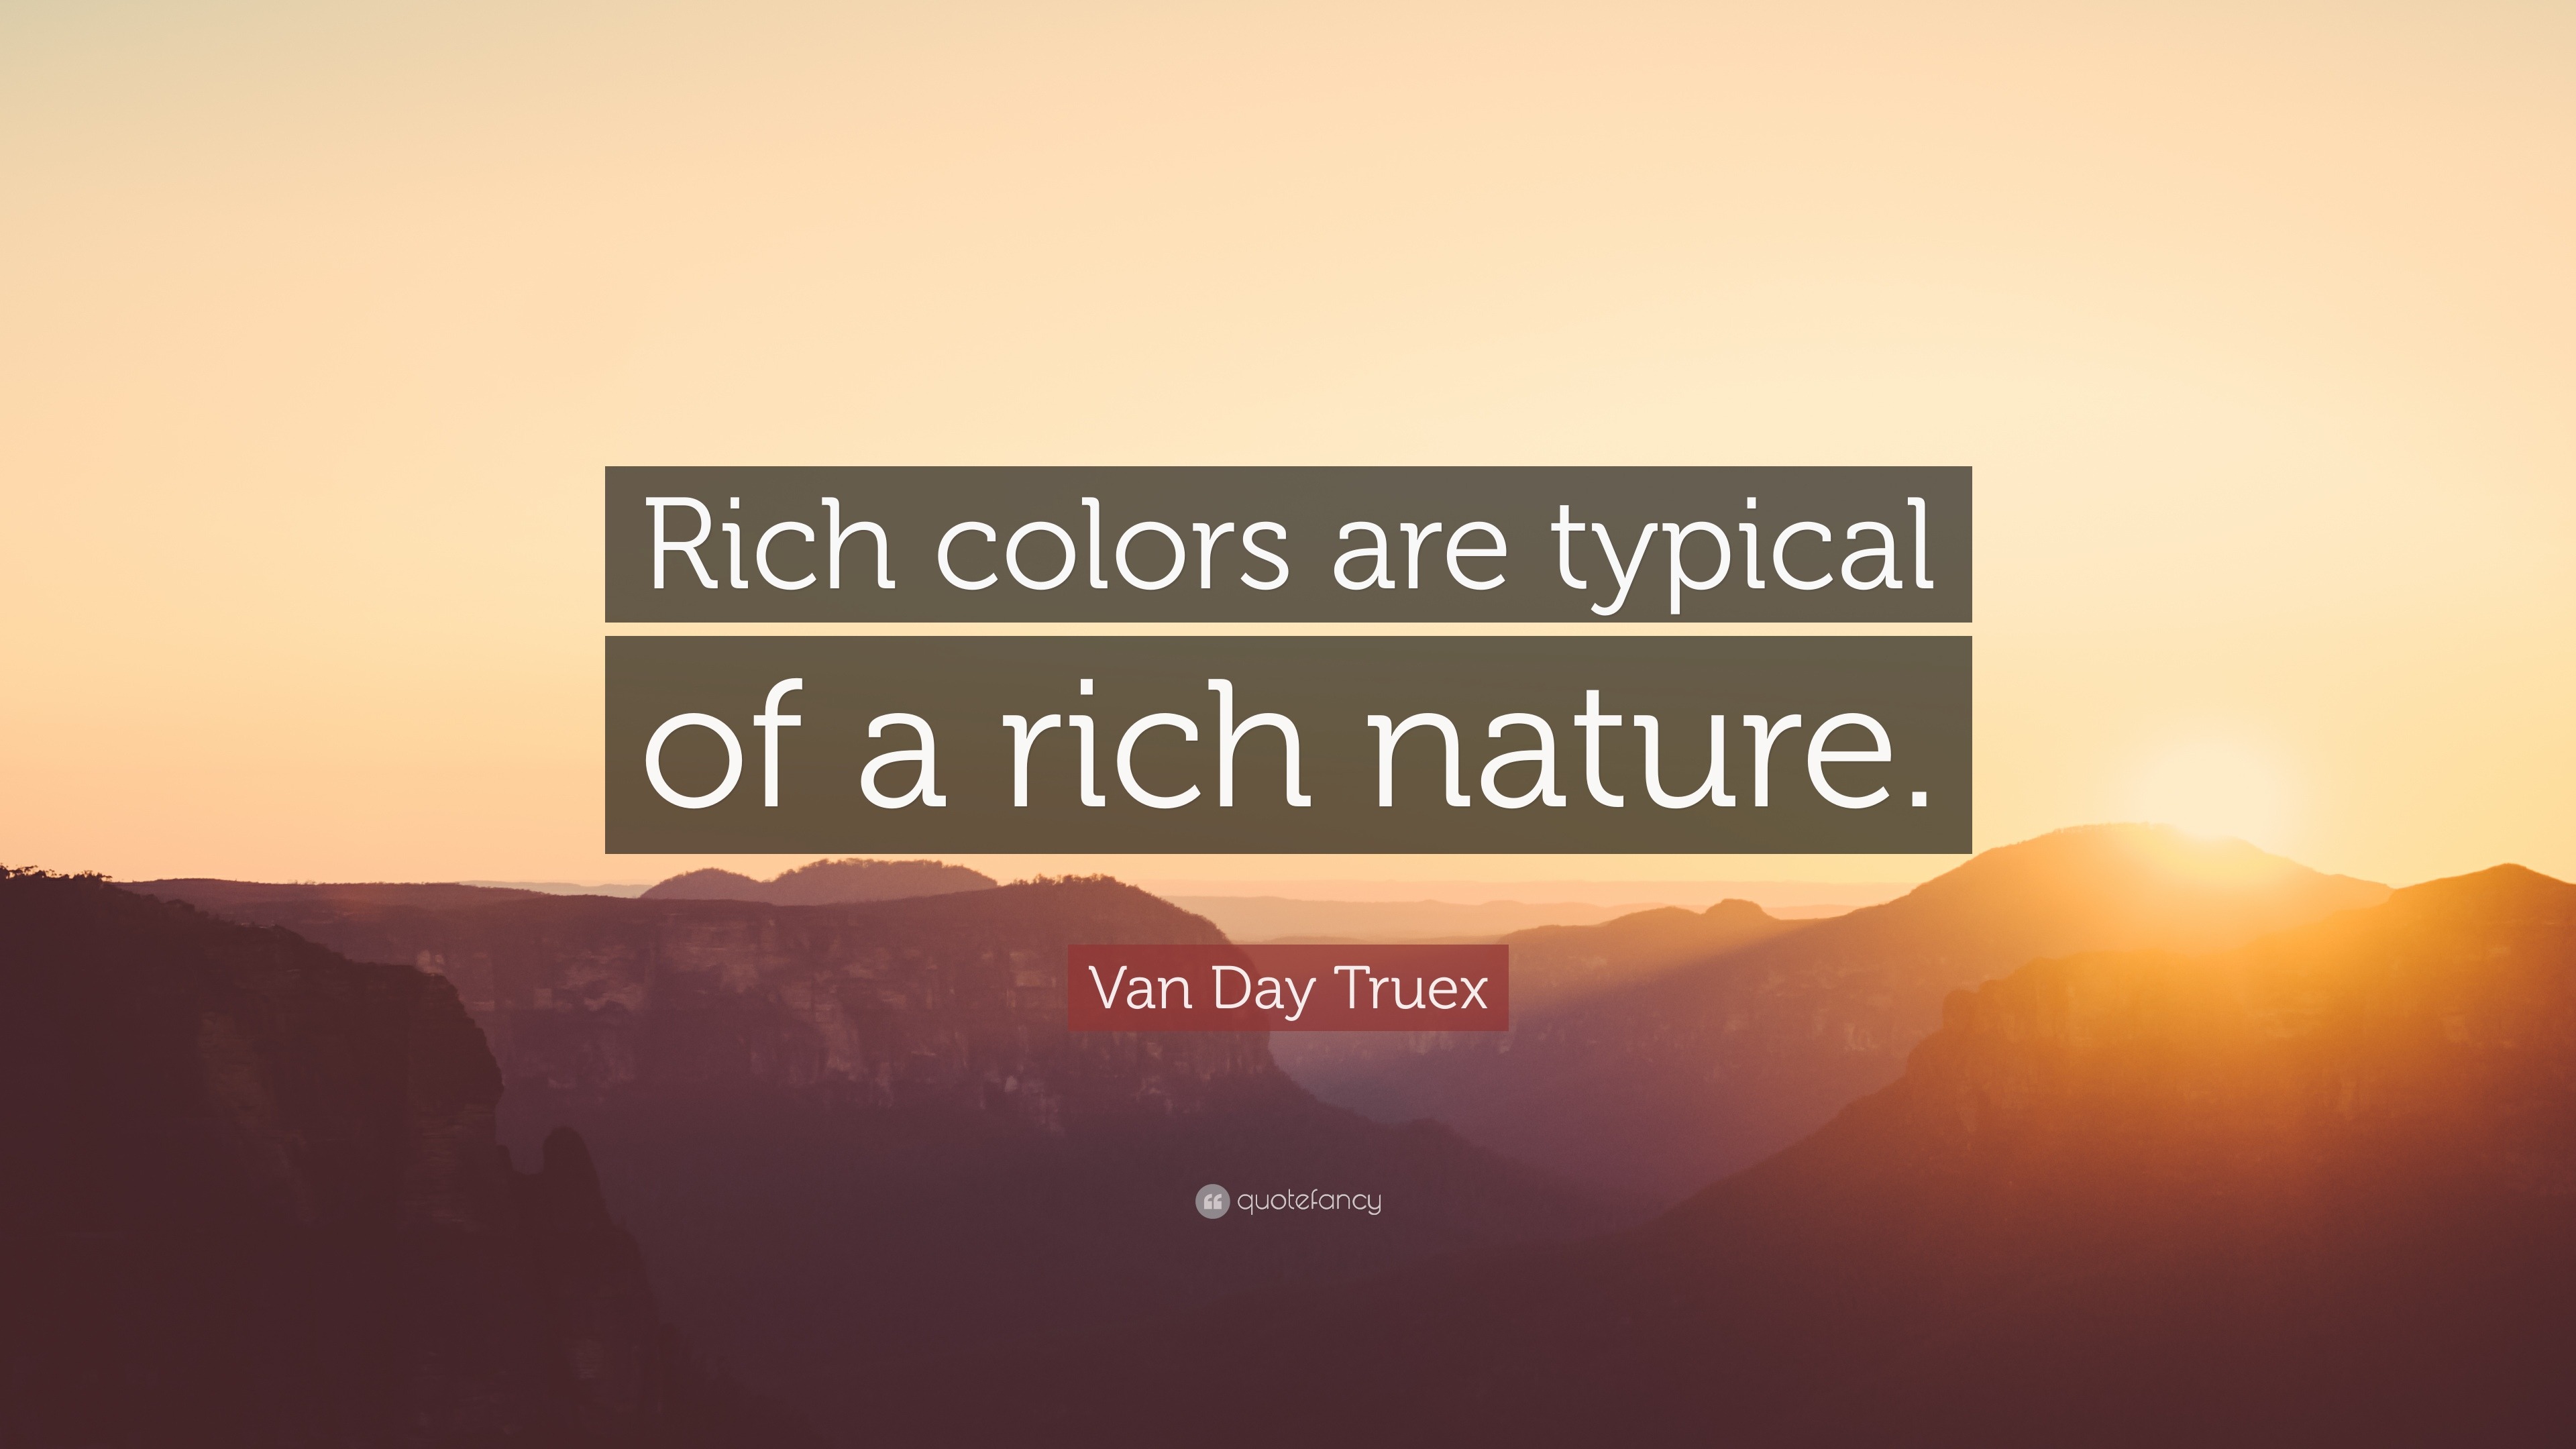 Van Day Truex Quote: "Rich colors are typical of a rich nature. 